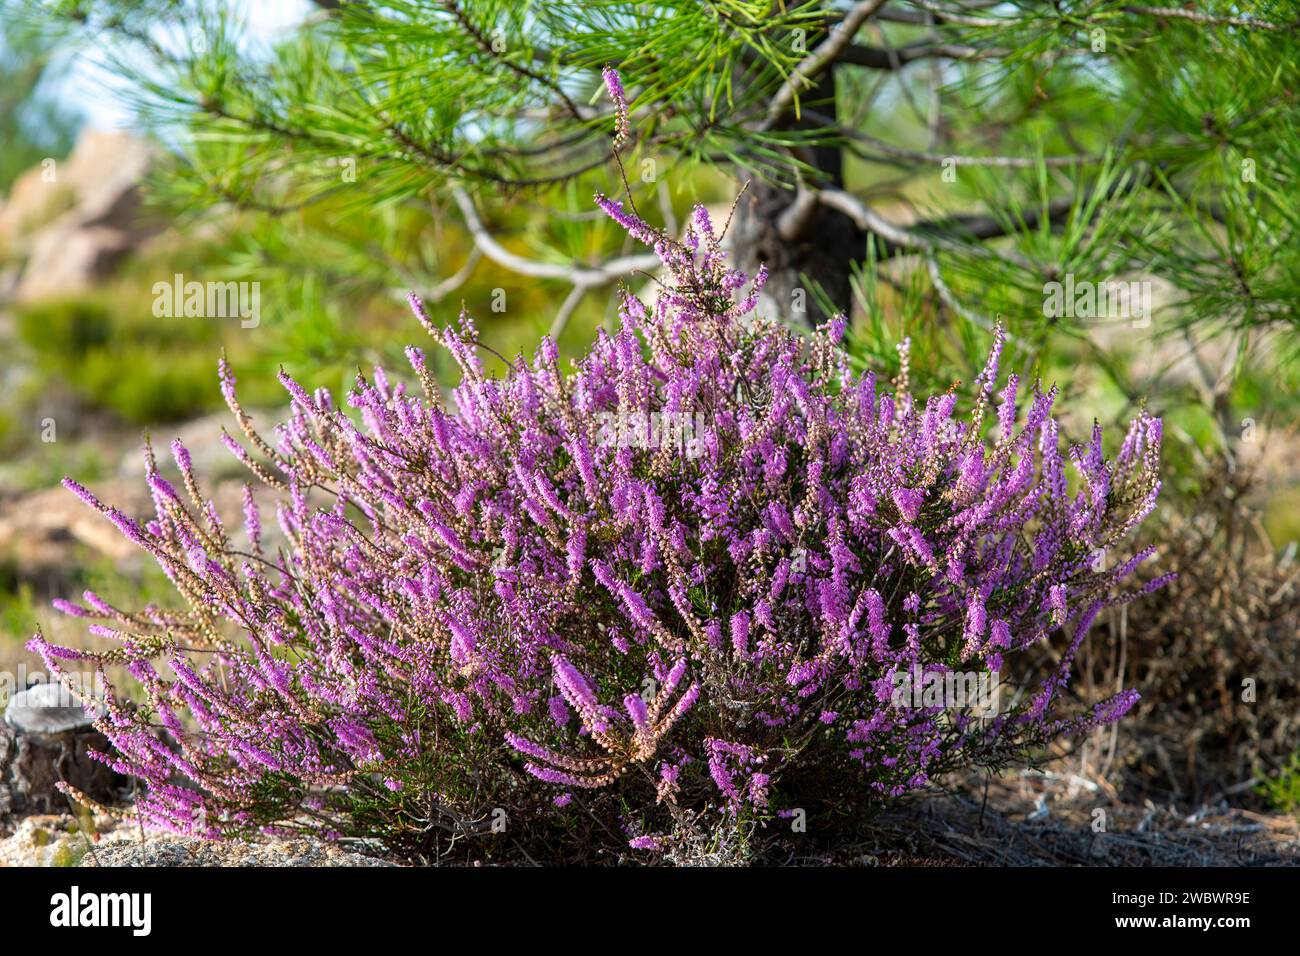 Close up of a shrub of heath with purple flowers in sunny environment with pine tree and rocks out of focus in background Stock Photo